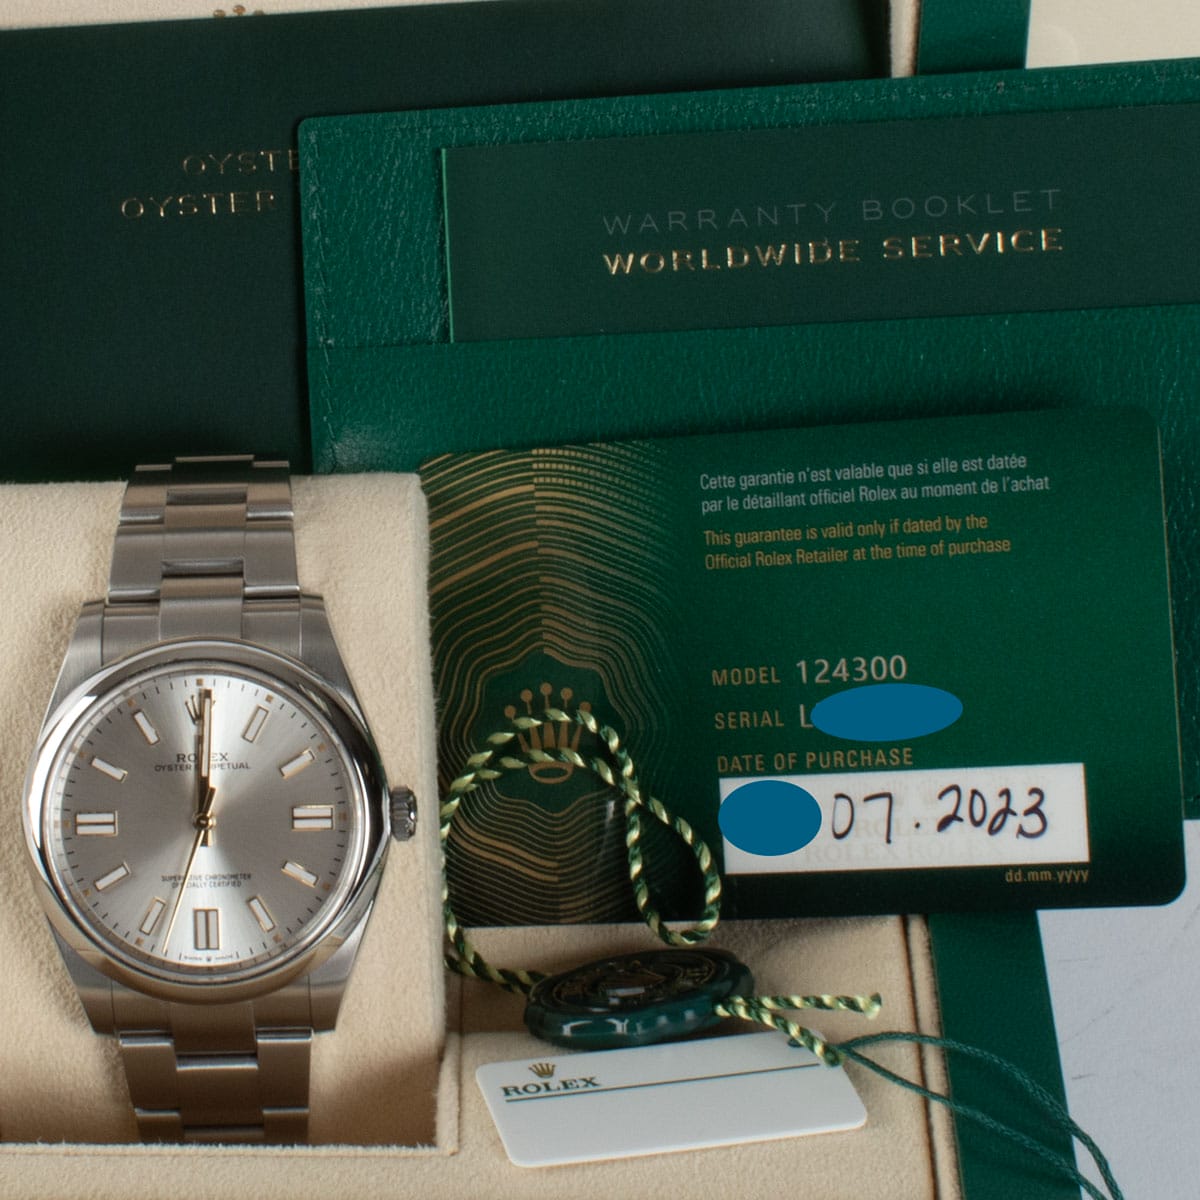 View in Box of Oyster Perpetual 41